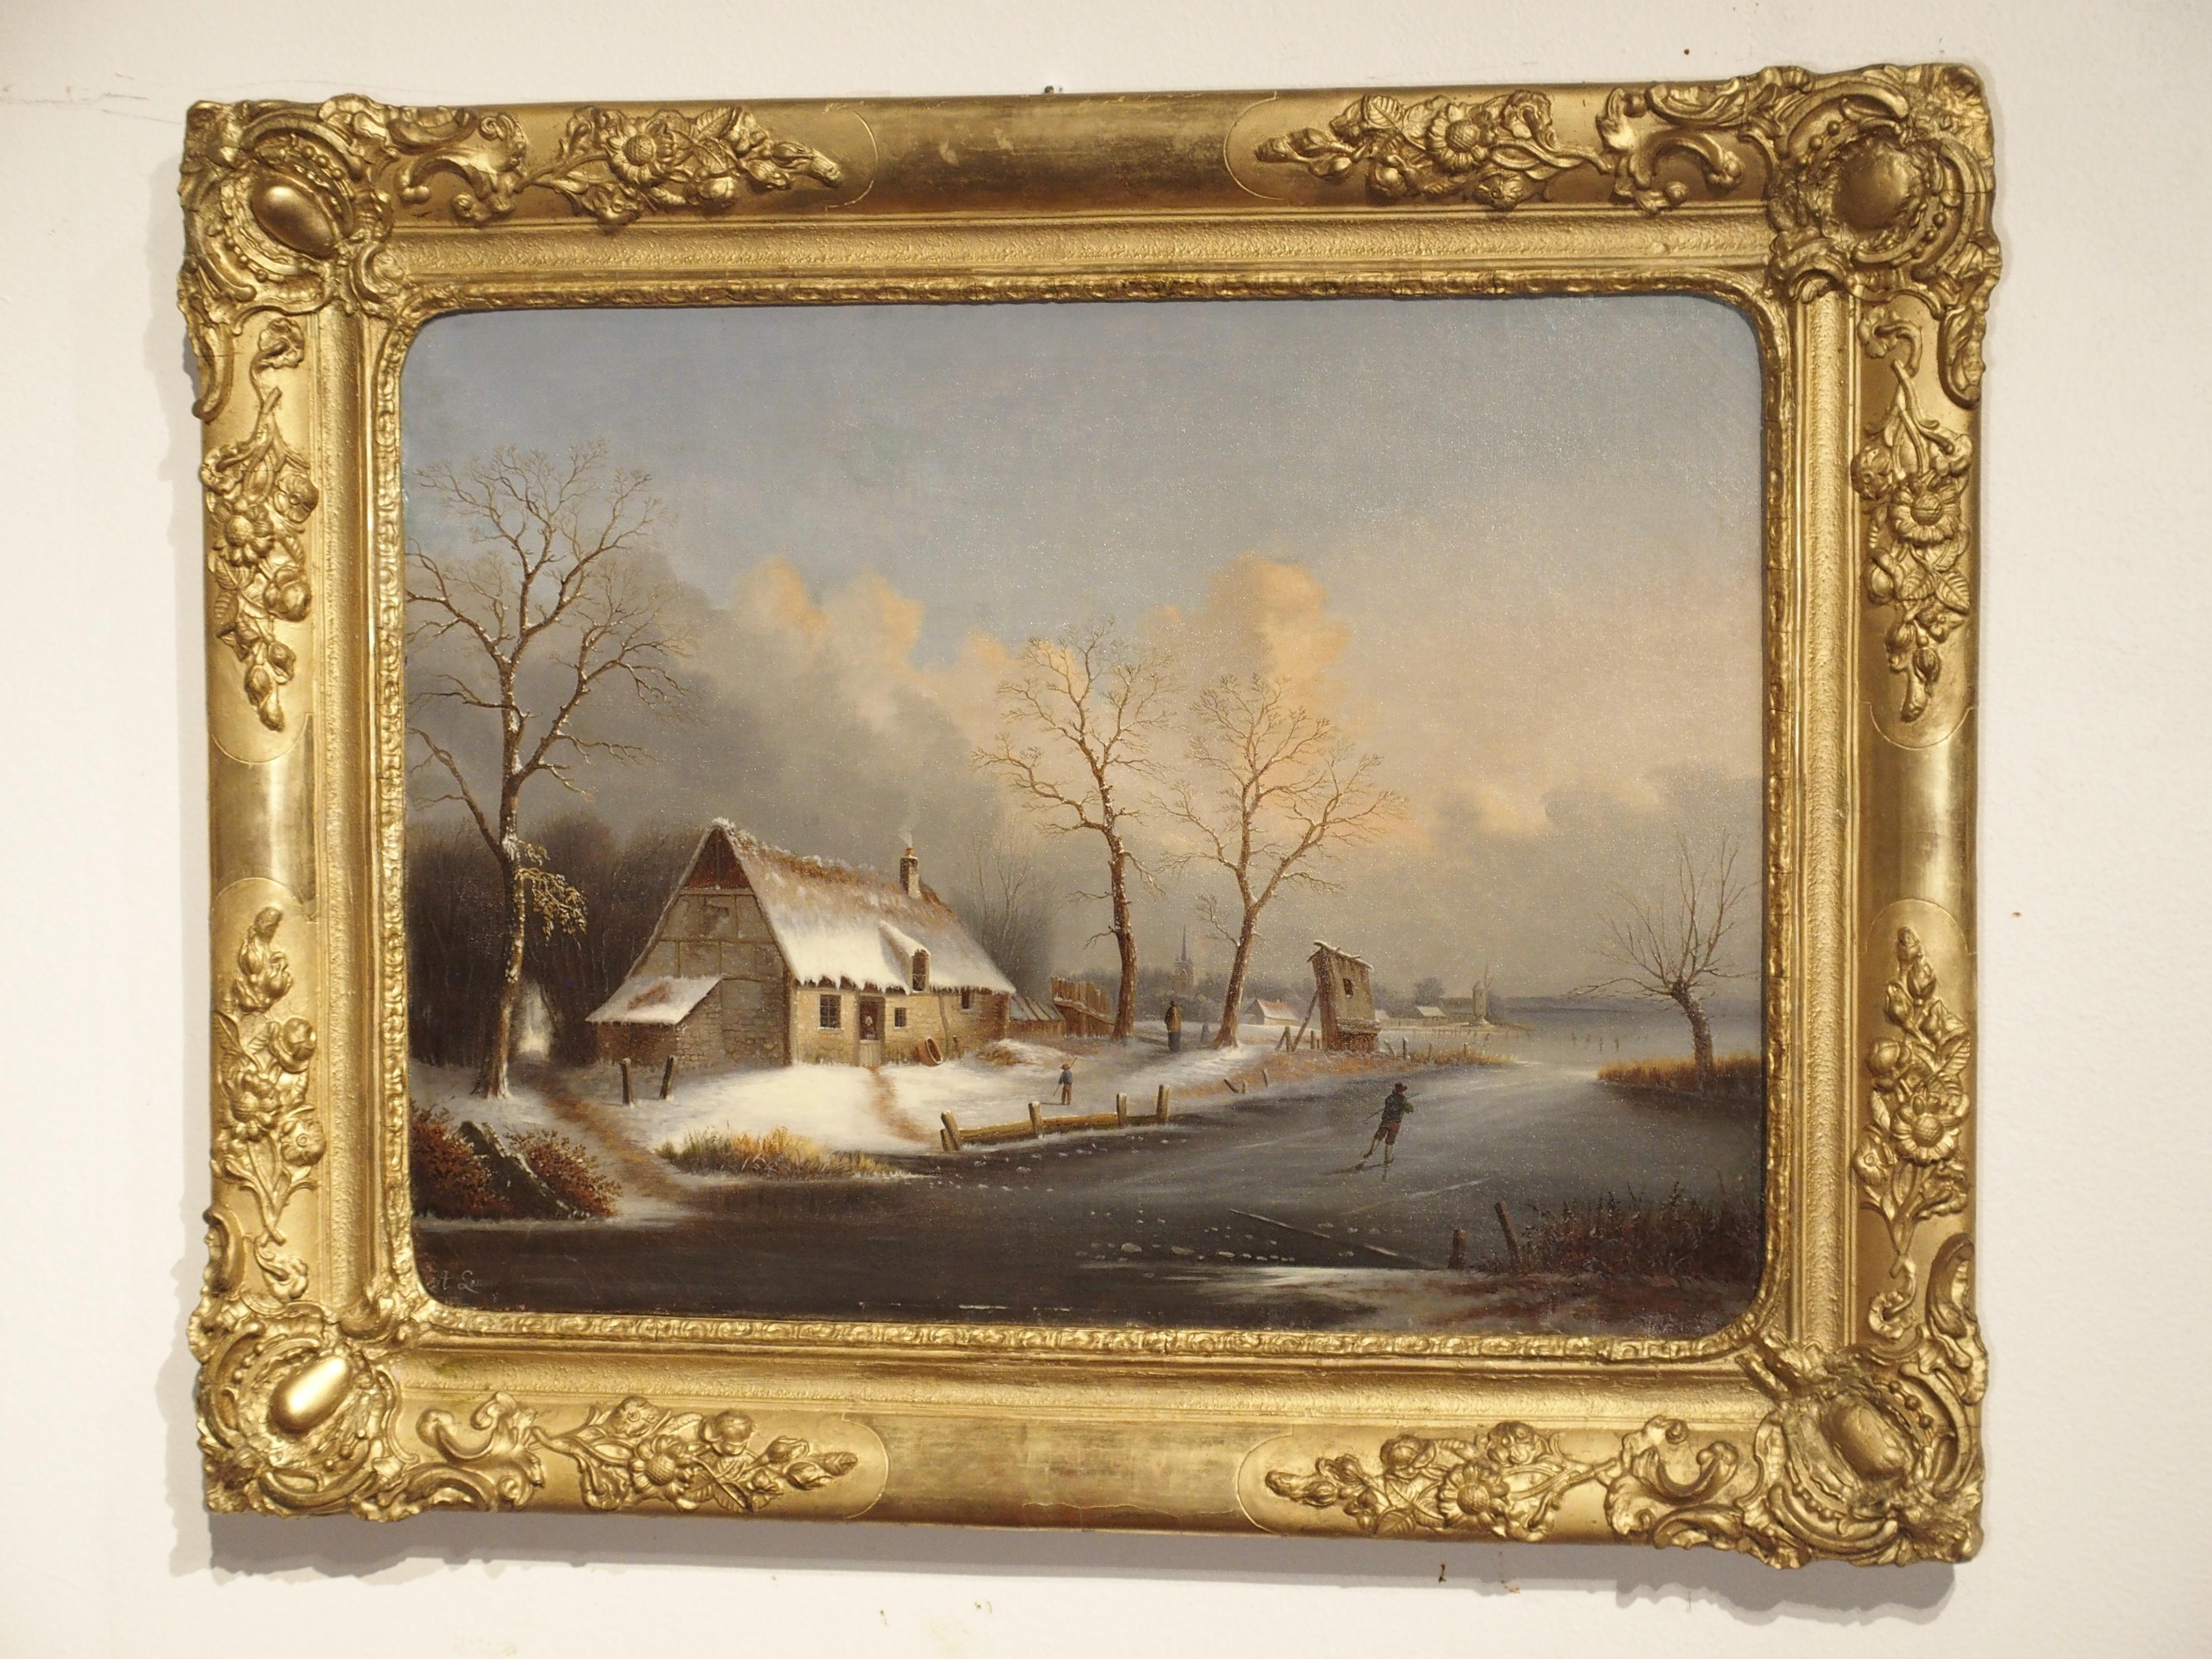 Coming from a very artistic family, Albert Lenoir (1801-1891) was known for his paintings and specifically, his winter scene paintings. He was influenced by the great Dutch painters of the 16th and 17th centuries who first made winter and skating